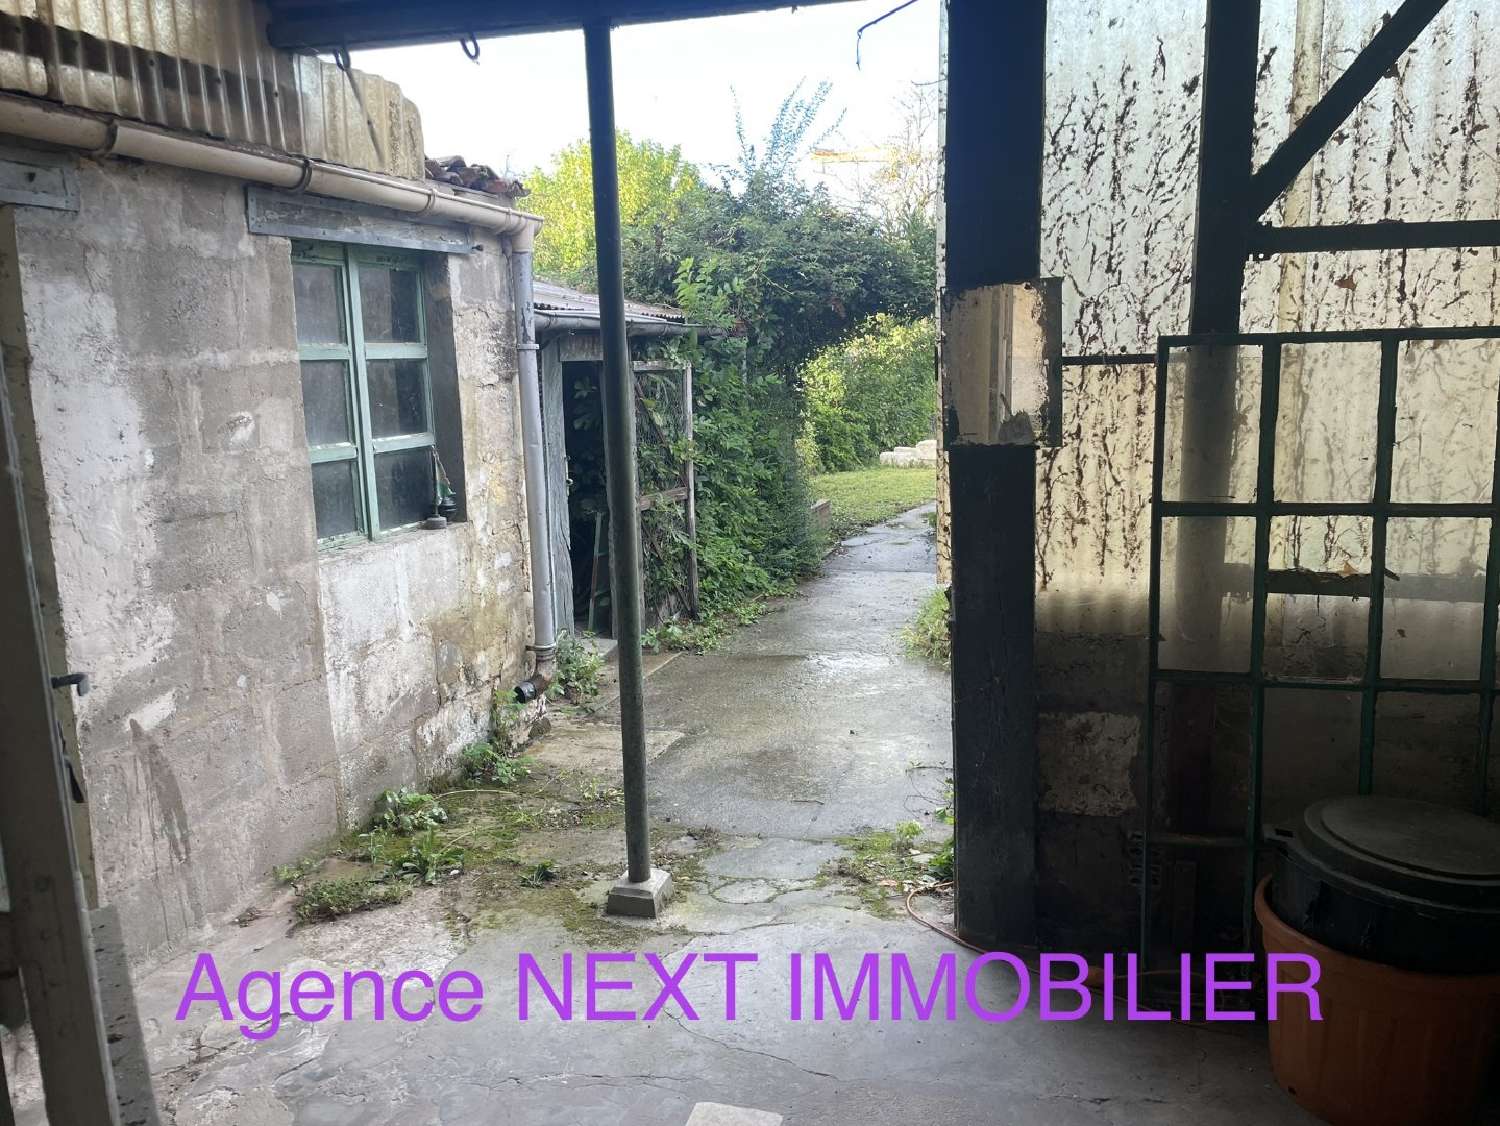  for sale house Libourne Gironde 5